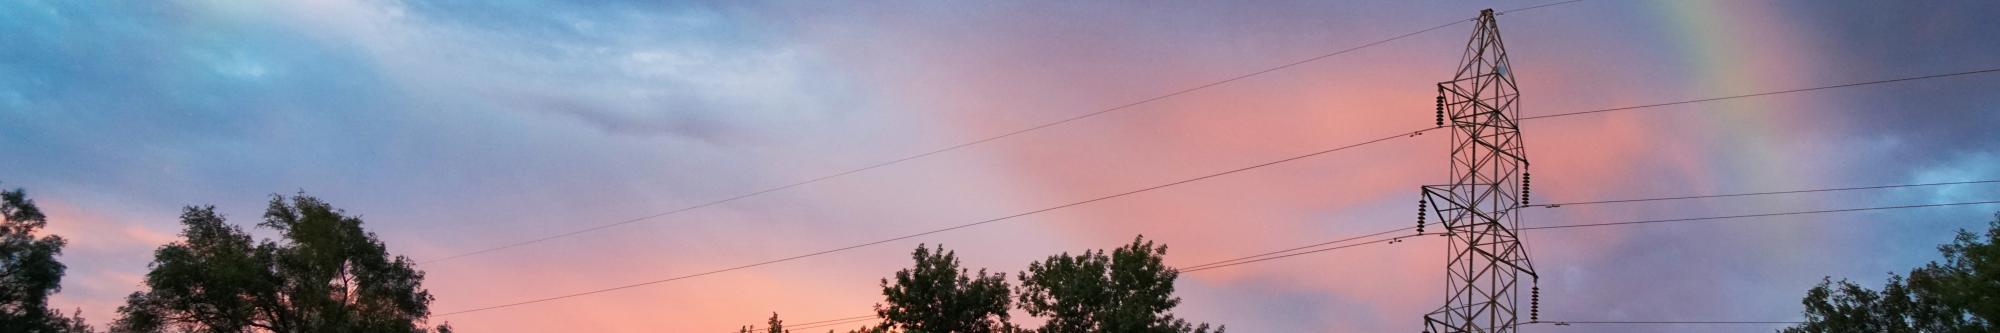 Power lines at dusk